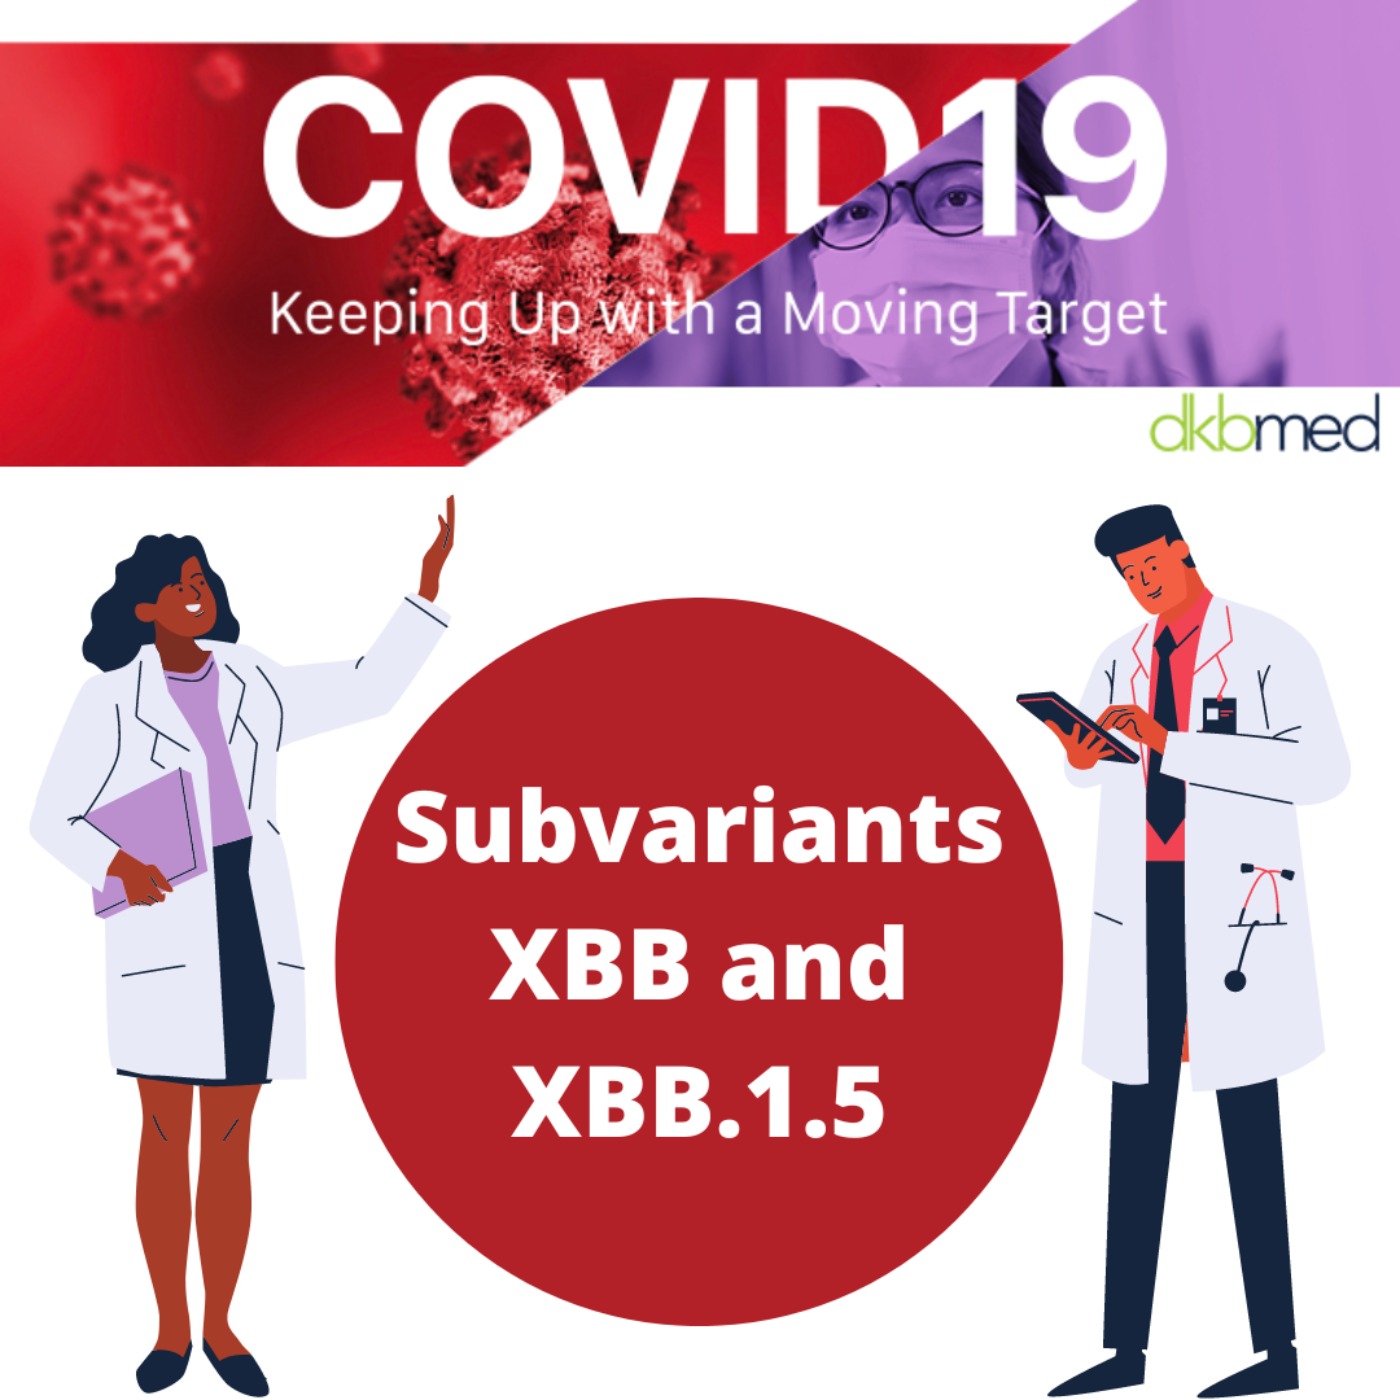 1/26/2023 - COVID-19 Subvariants XBB and XBB.1.5